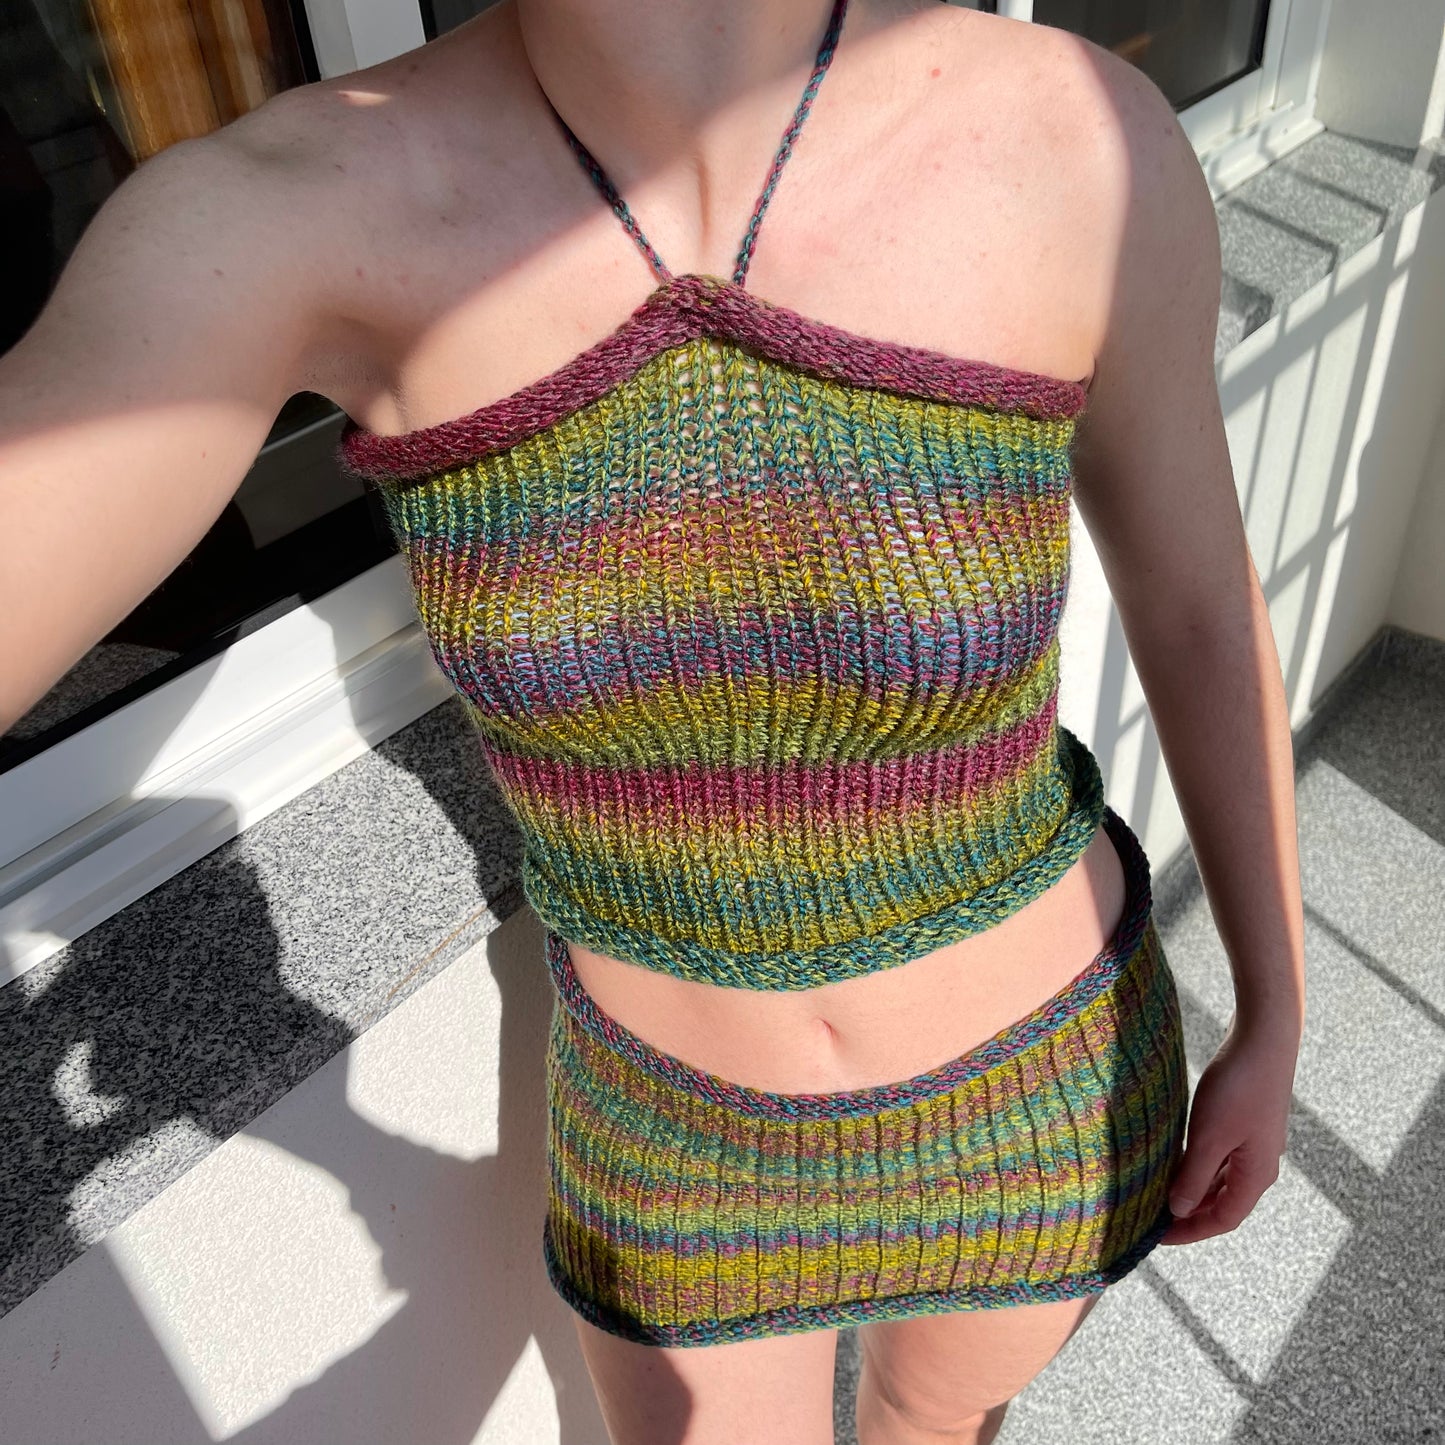 Handmade knitted halter neck top in green, purple and blue